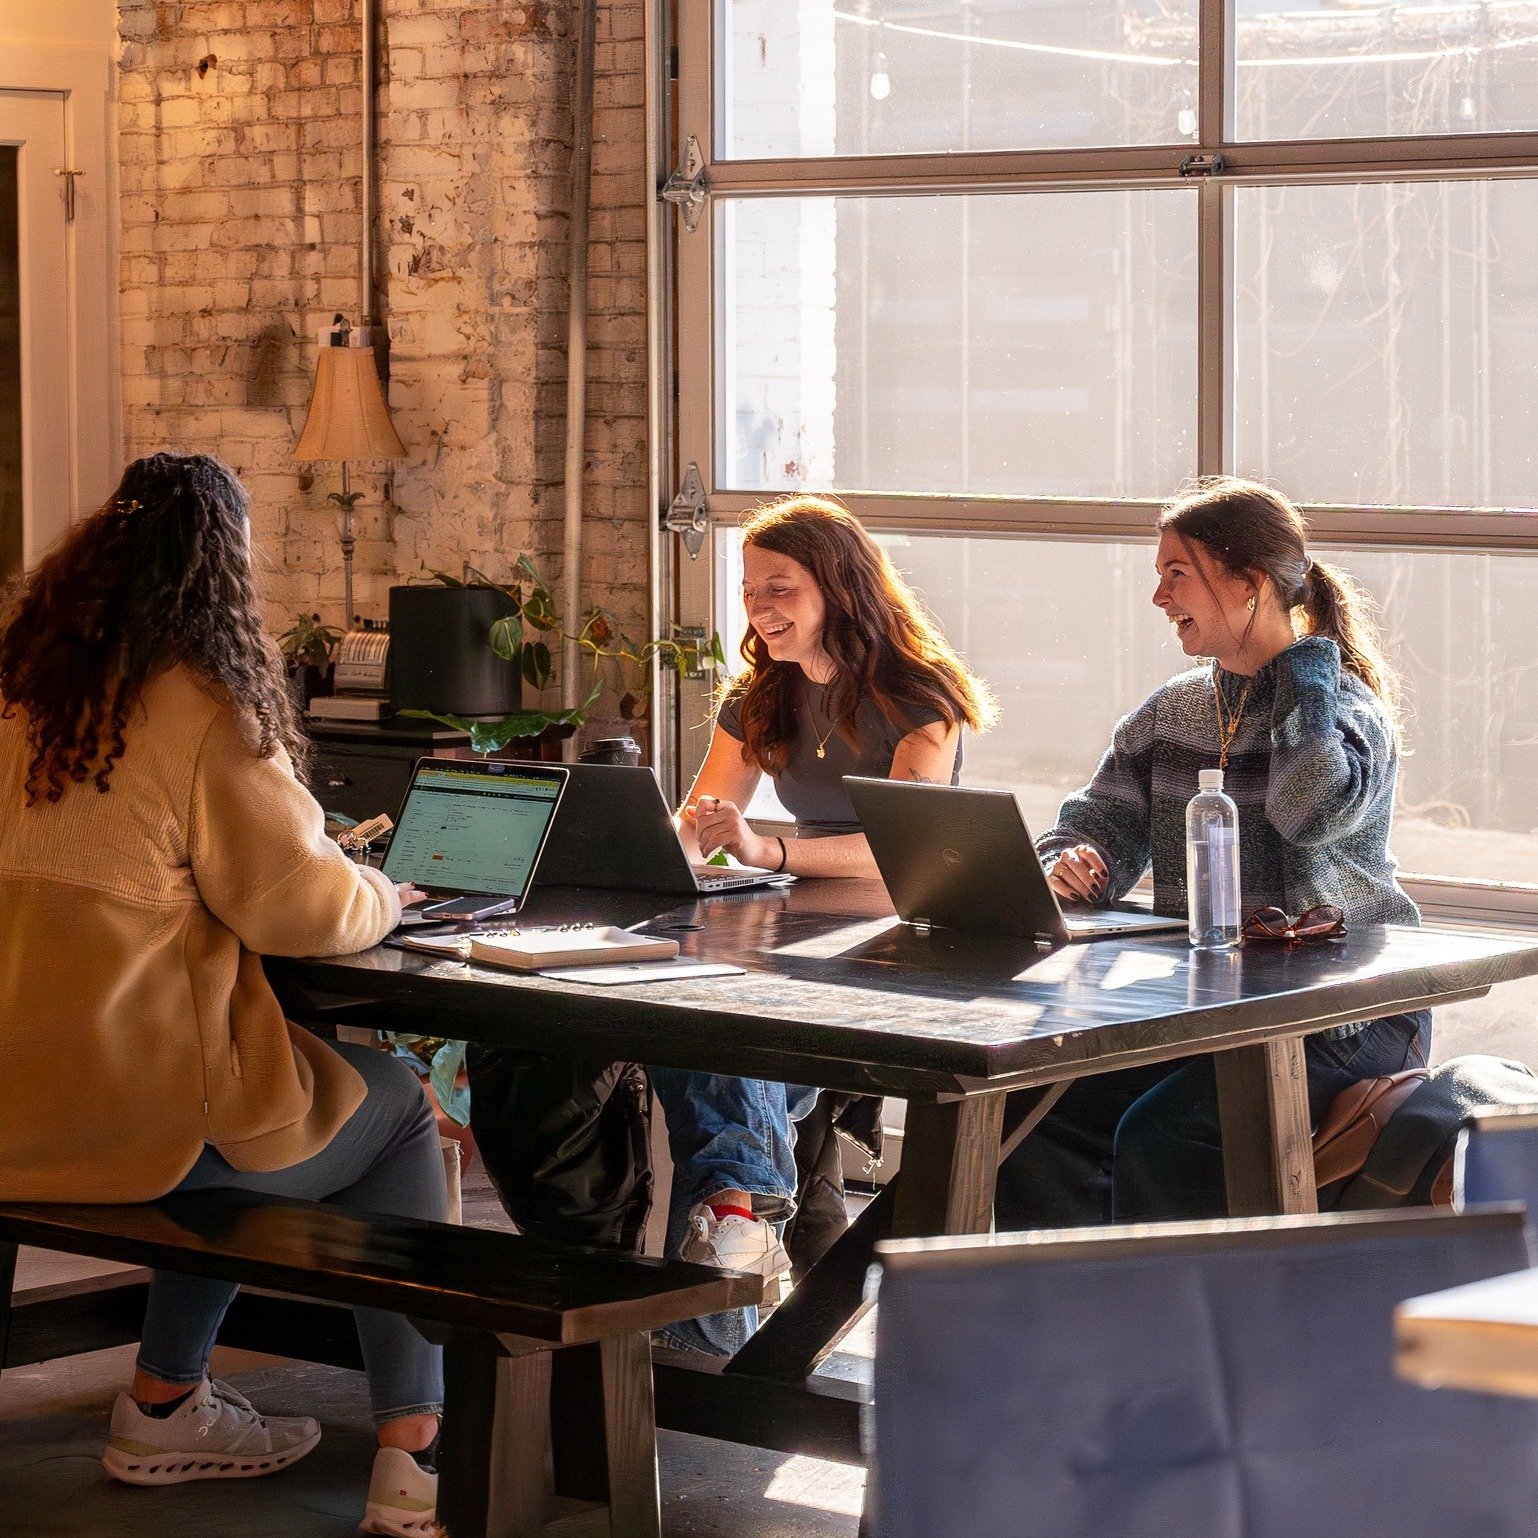 TOMORROW, you may want to consider just being in the district from morning &lsquo;til night. 🌞🌙

Start the day off with...
💻 Free CoWorx Friday at @coworxspace: From 9am-5pm, enjoy FREE coworking, free @bluecuproasterycoffee, free networking, and 